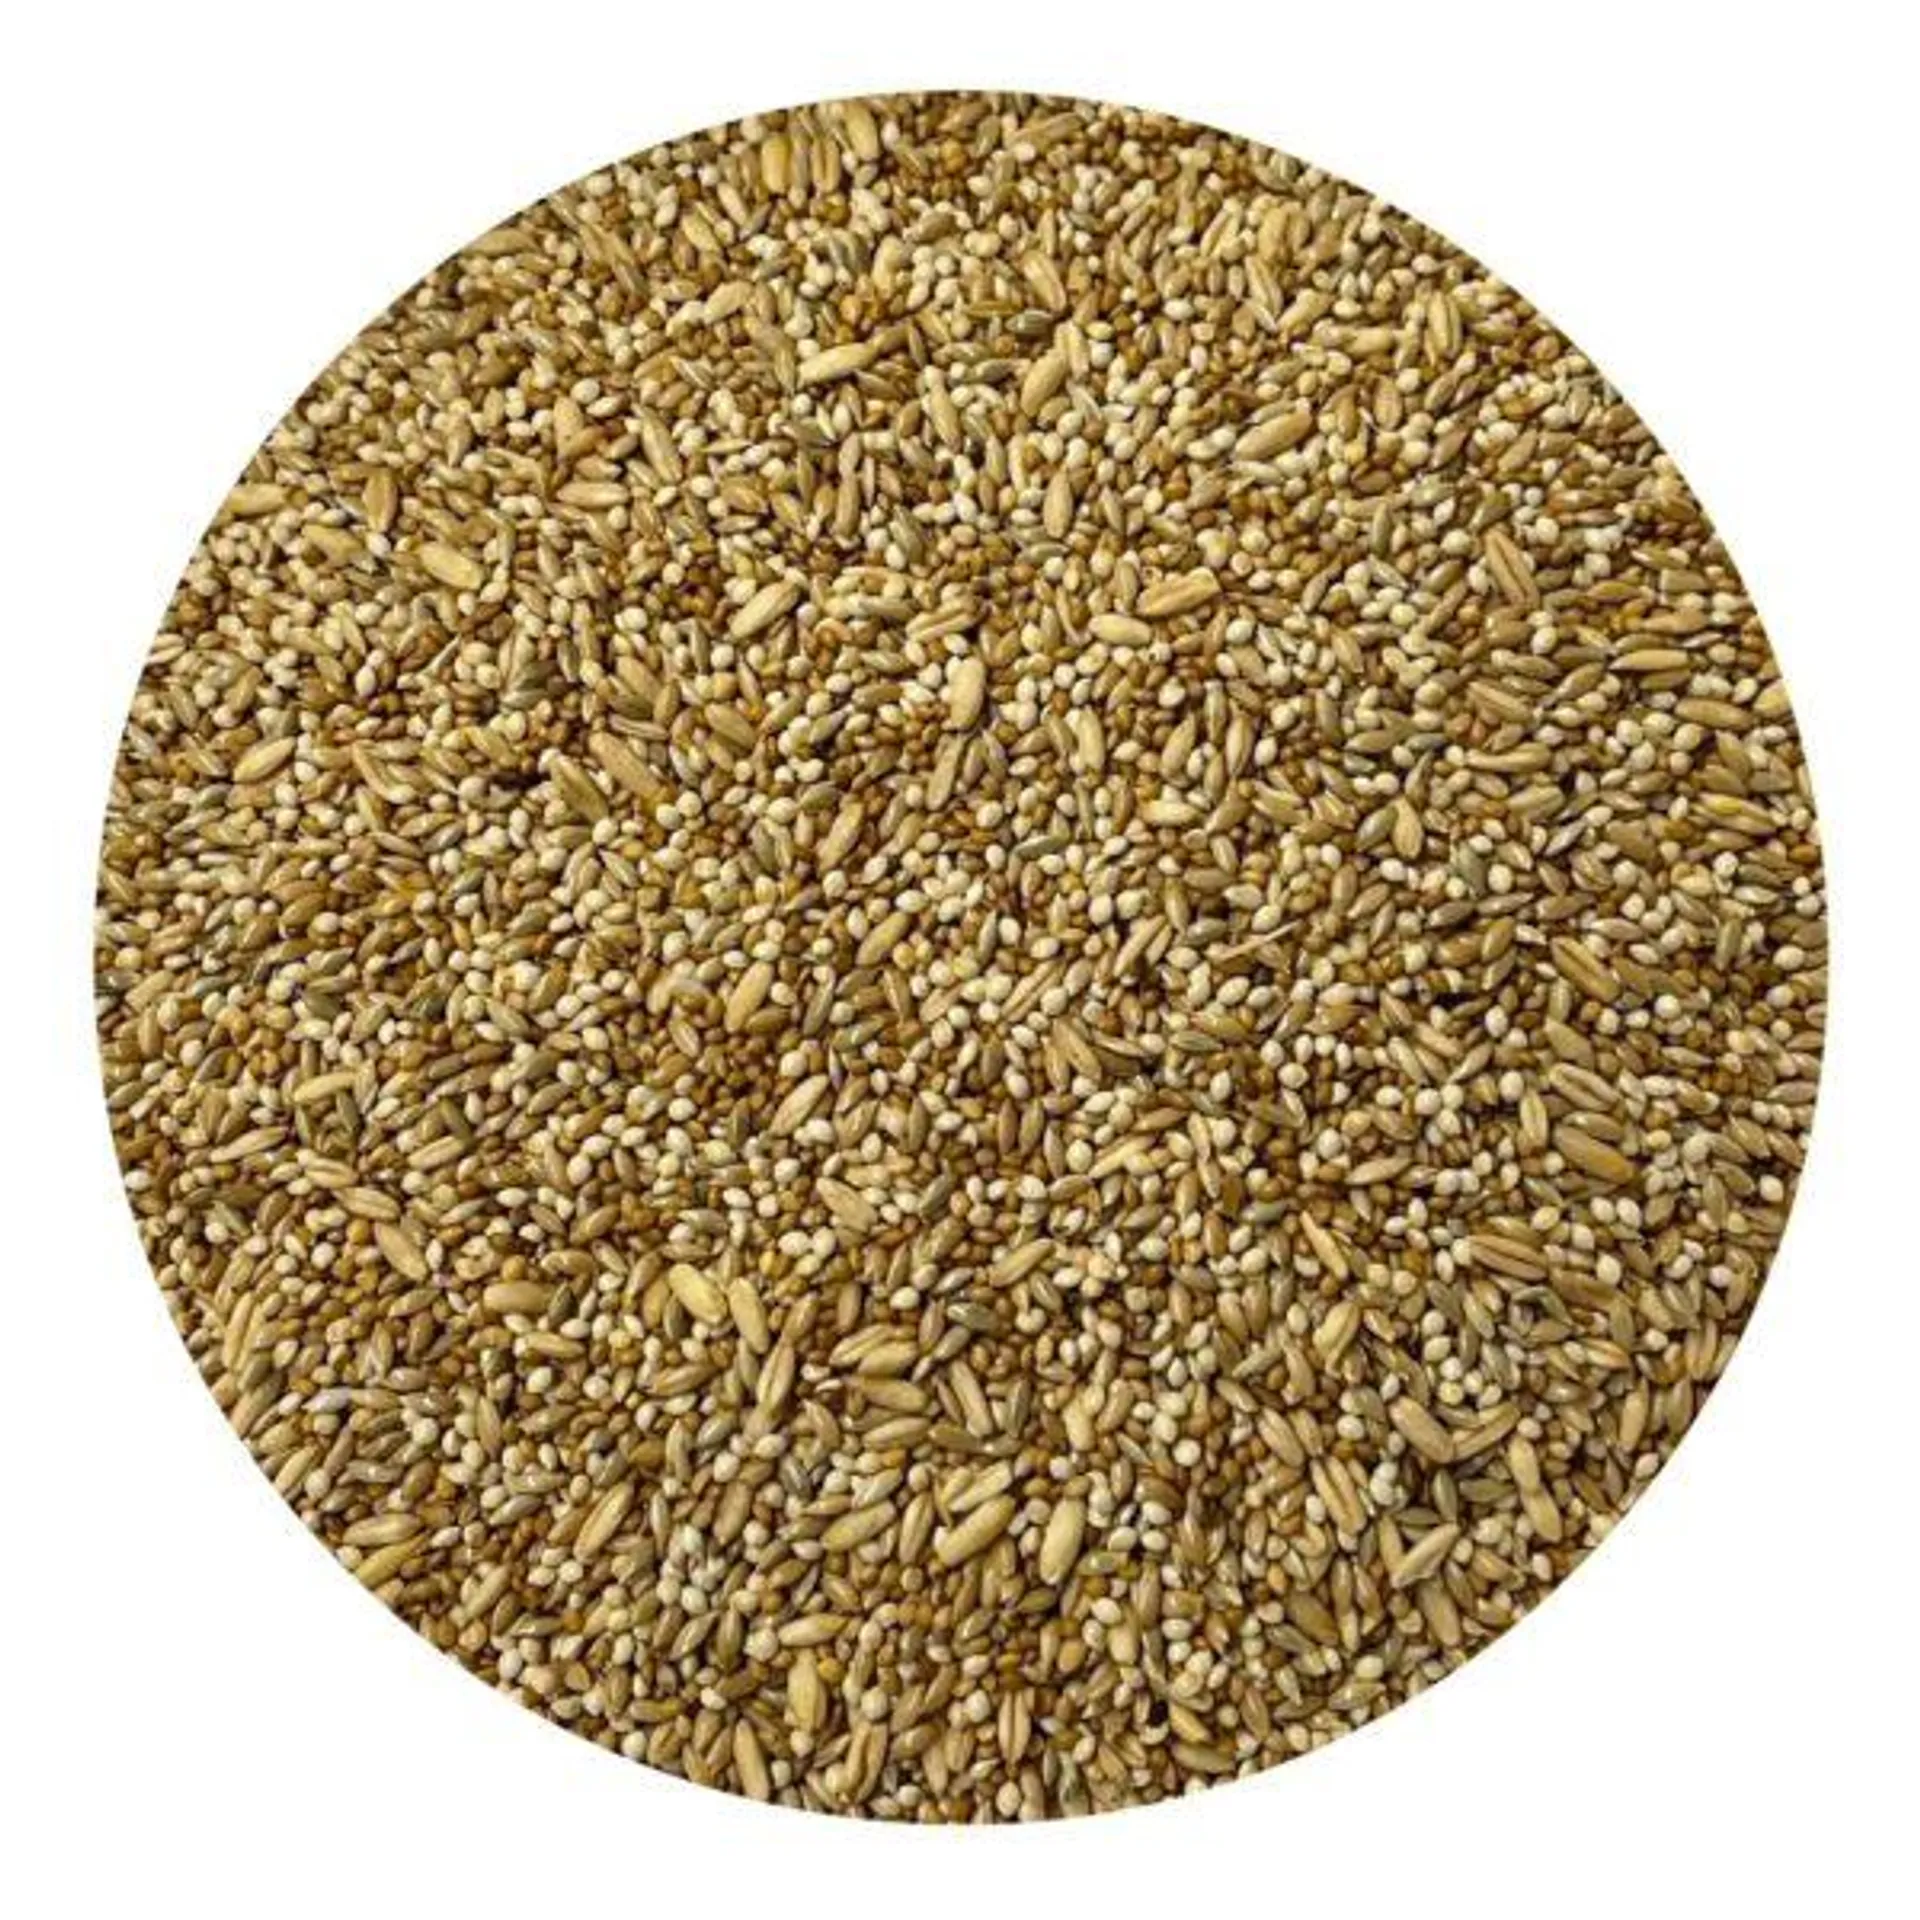 Budgie Seed Mix 10kg